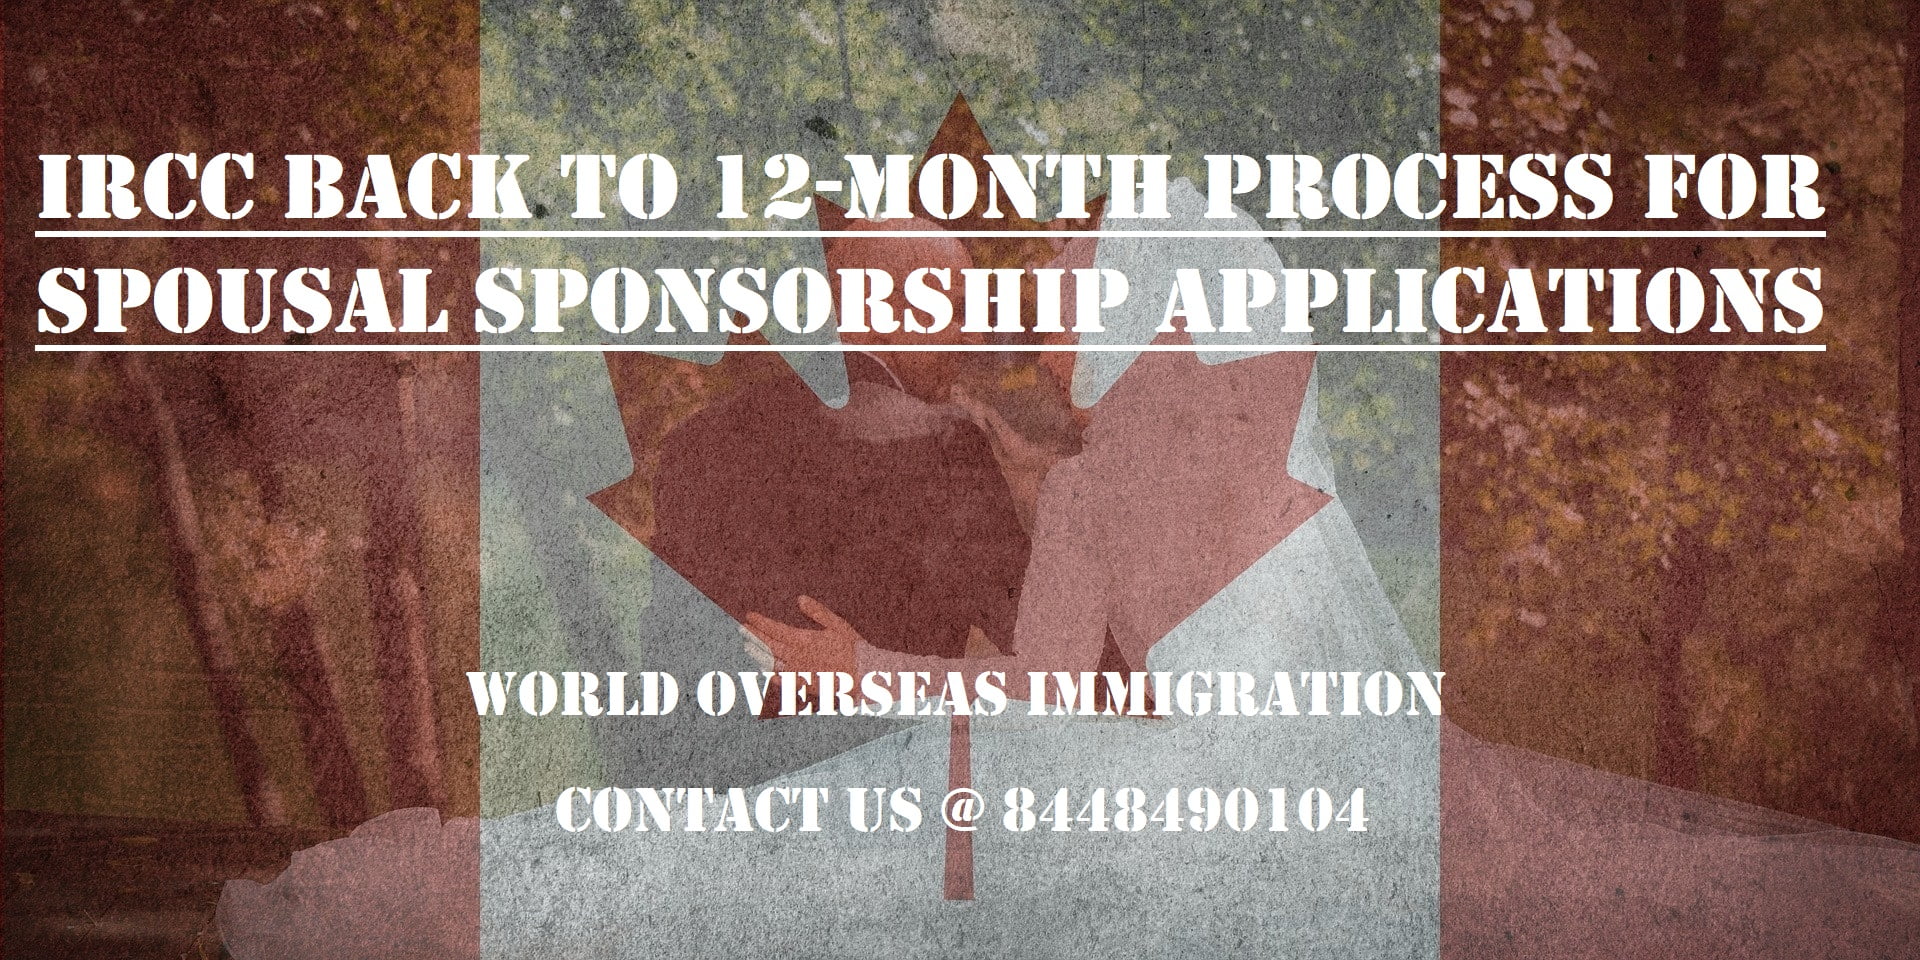 12-month process for spousal sponsorship applications in IRCC